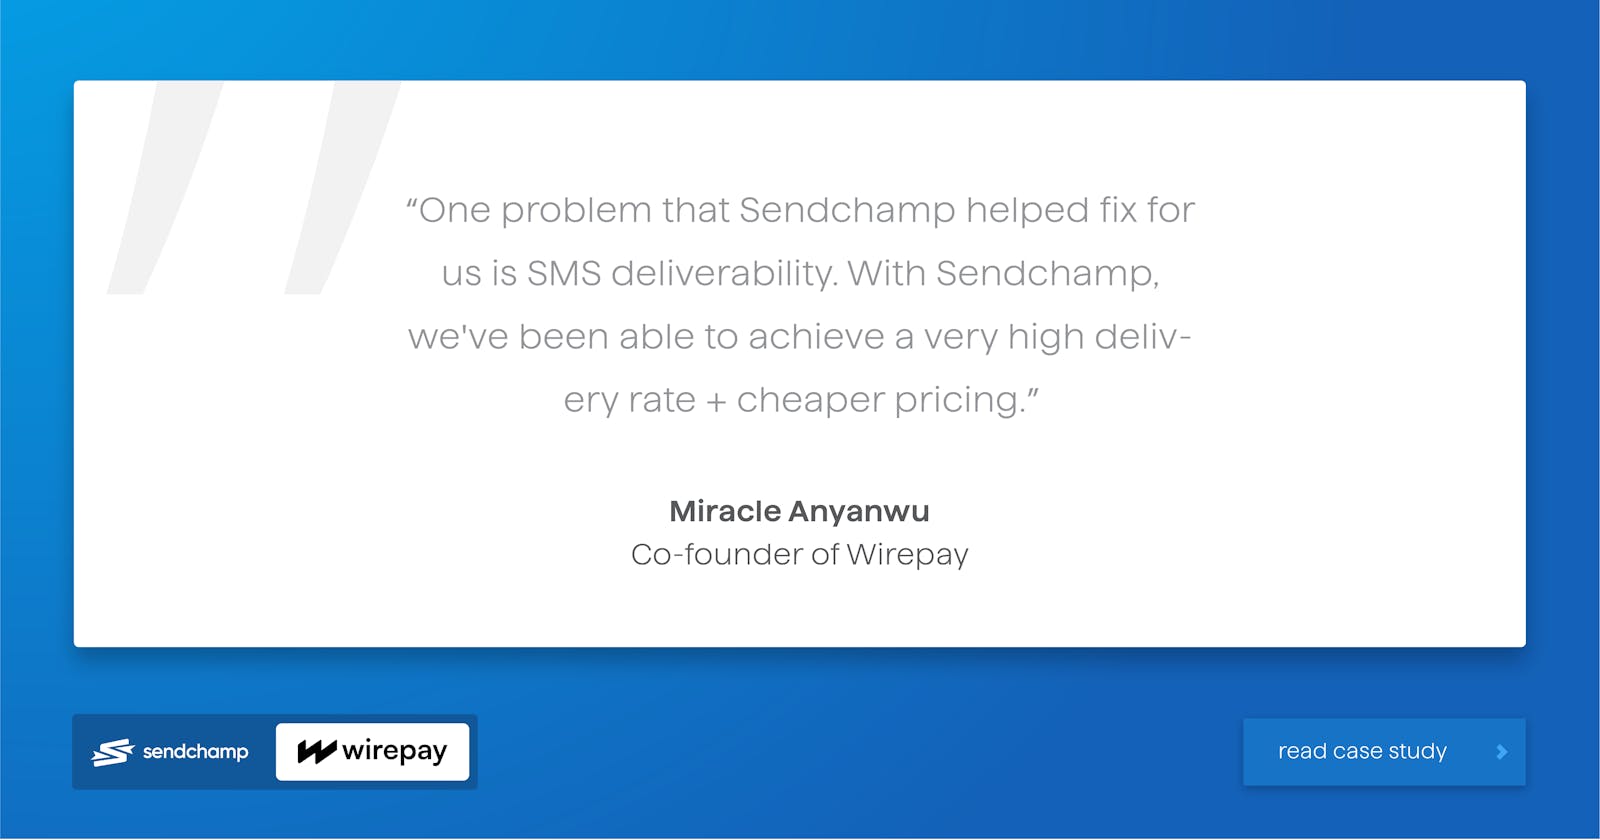 How Wirepay Uses Sendchamp to Achieve High SMS Delivery Rate at Affordable Pricing